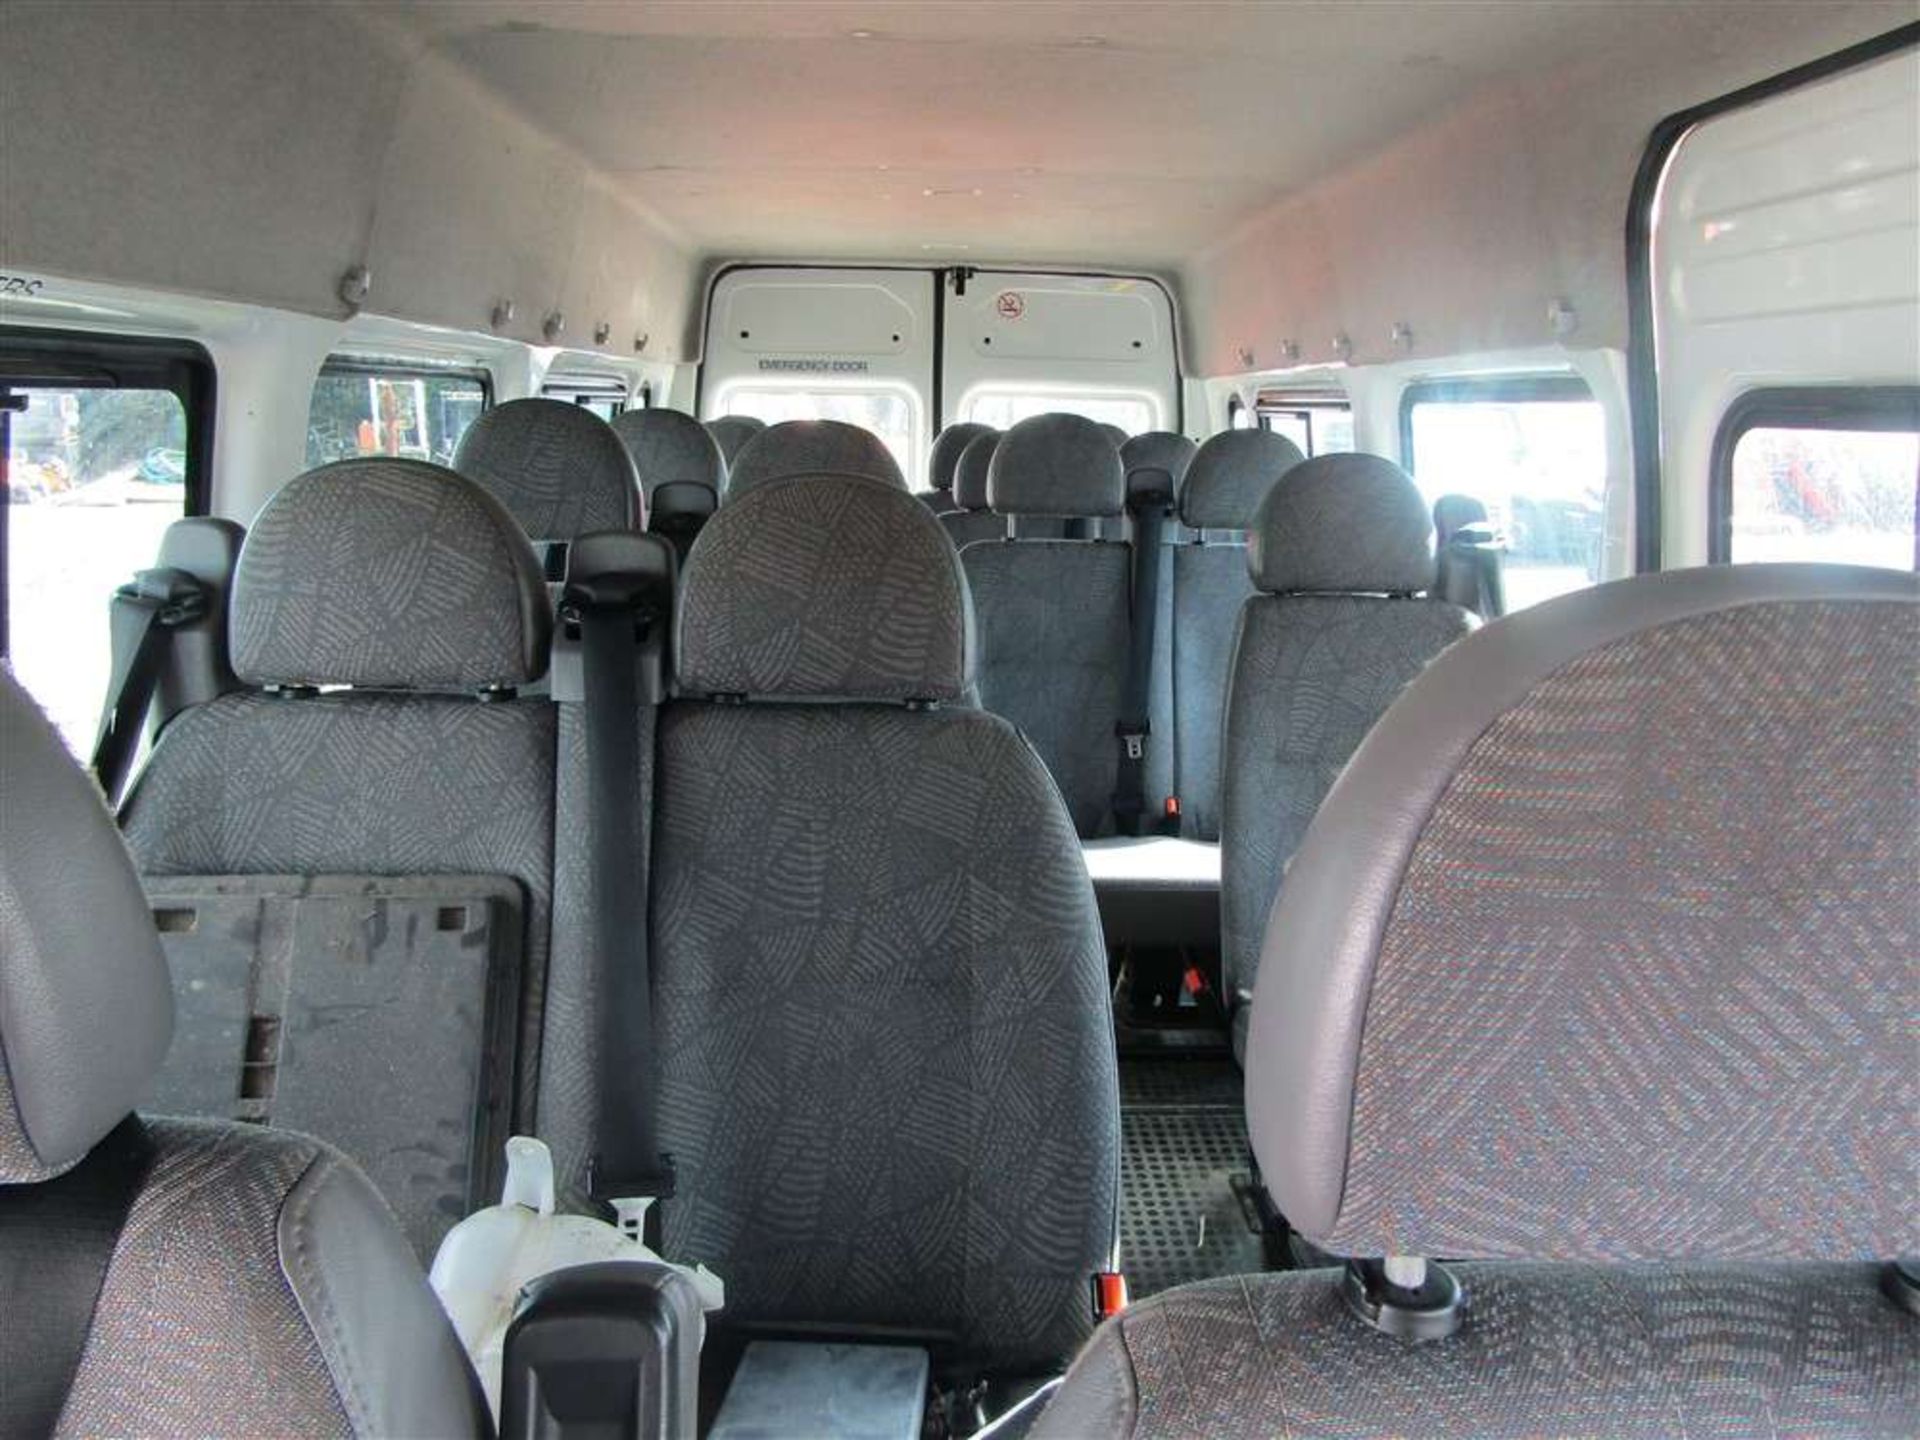 2003 03 reg Ford Transit Minibus (Non Runner) (Direct Council) - Image 6 of 6